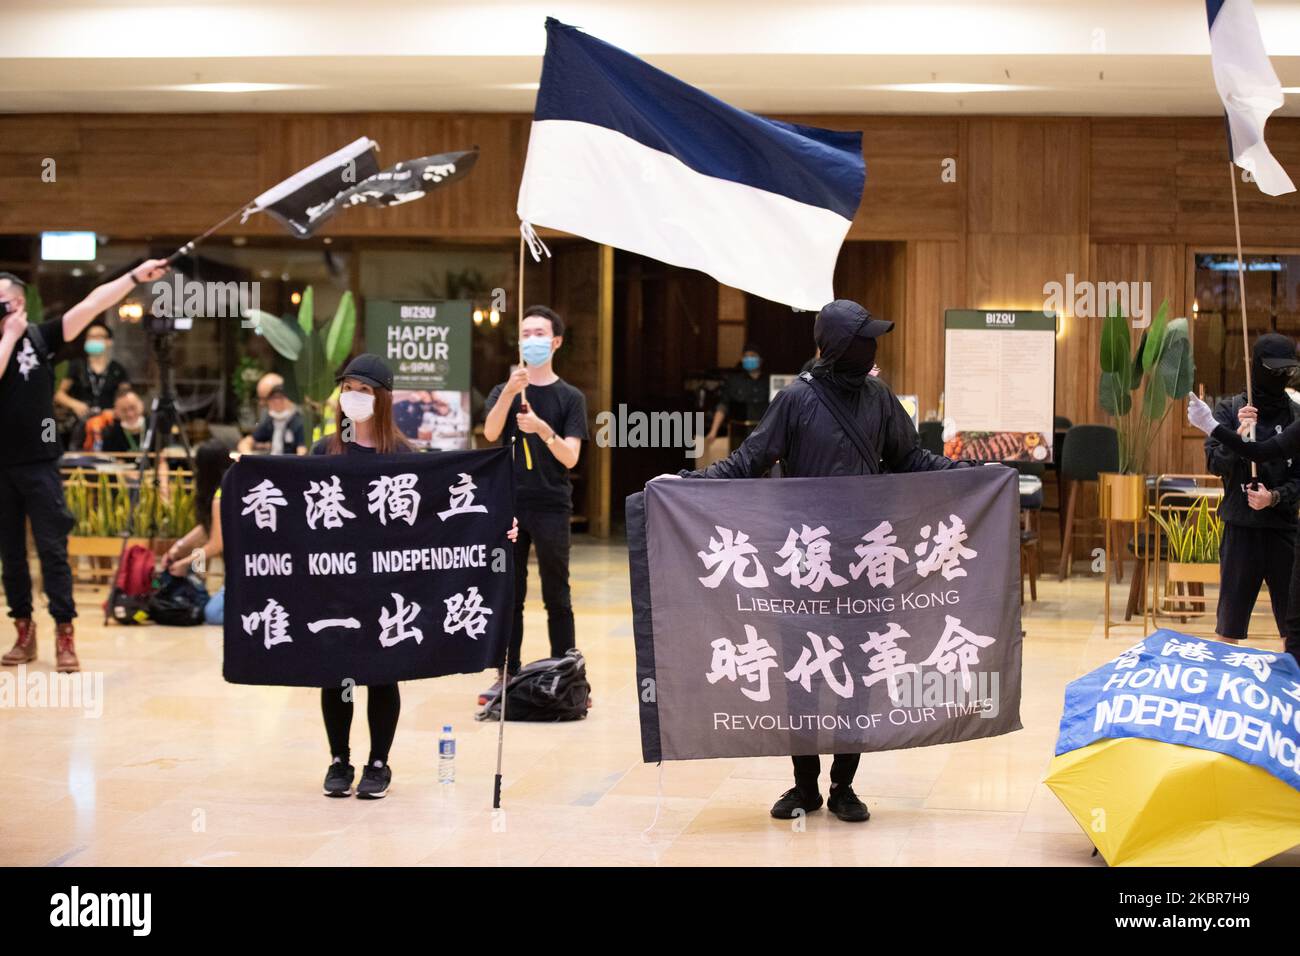 Pro Democracy supporters hold Hong Kong Independence signs and chant slogans such as 'One Nation, One Hong Kong' while waving what some say is the 'New Hong Kong Flag' as members of the public queue for hours to pay respects on the one year anniversary of the death of Marco Leung Ling-Kit who fell to his death in 2019 on June 15, 2020 in Hong Kong, China.(Photo by Simon Jankowski/NurPhoto) Stock Photo